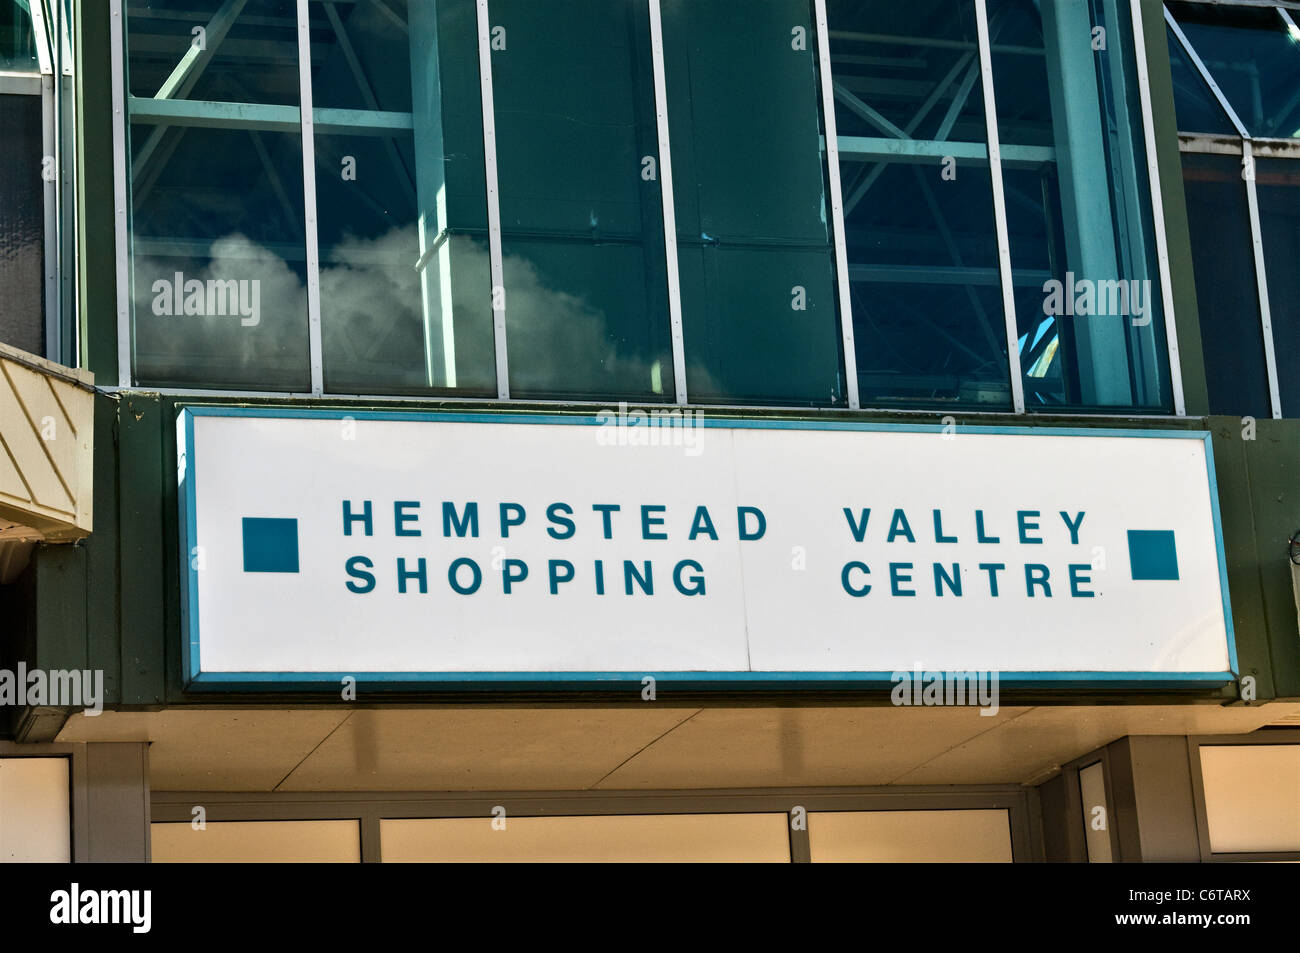 Hempstead Vally Shopping Centre sign and entrance, Gillingham, Kent England Stock Photo